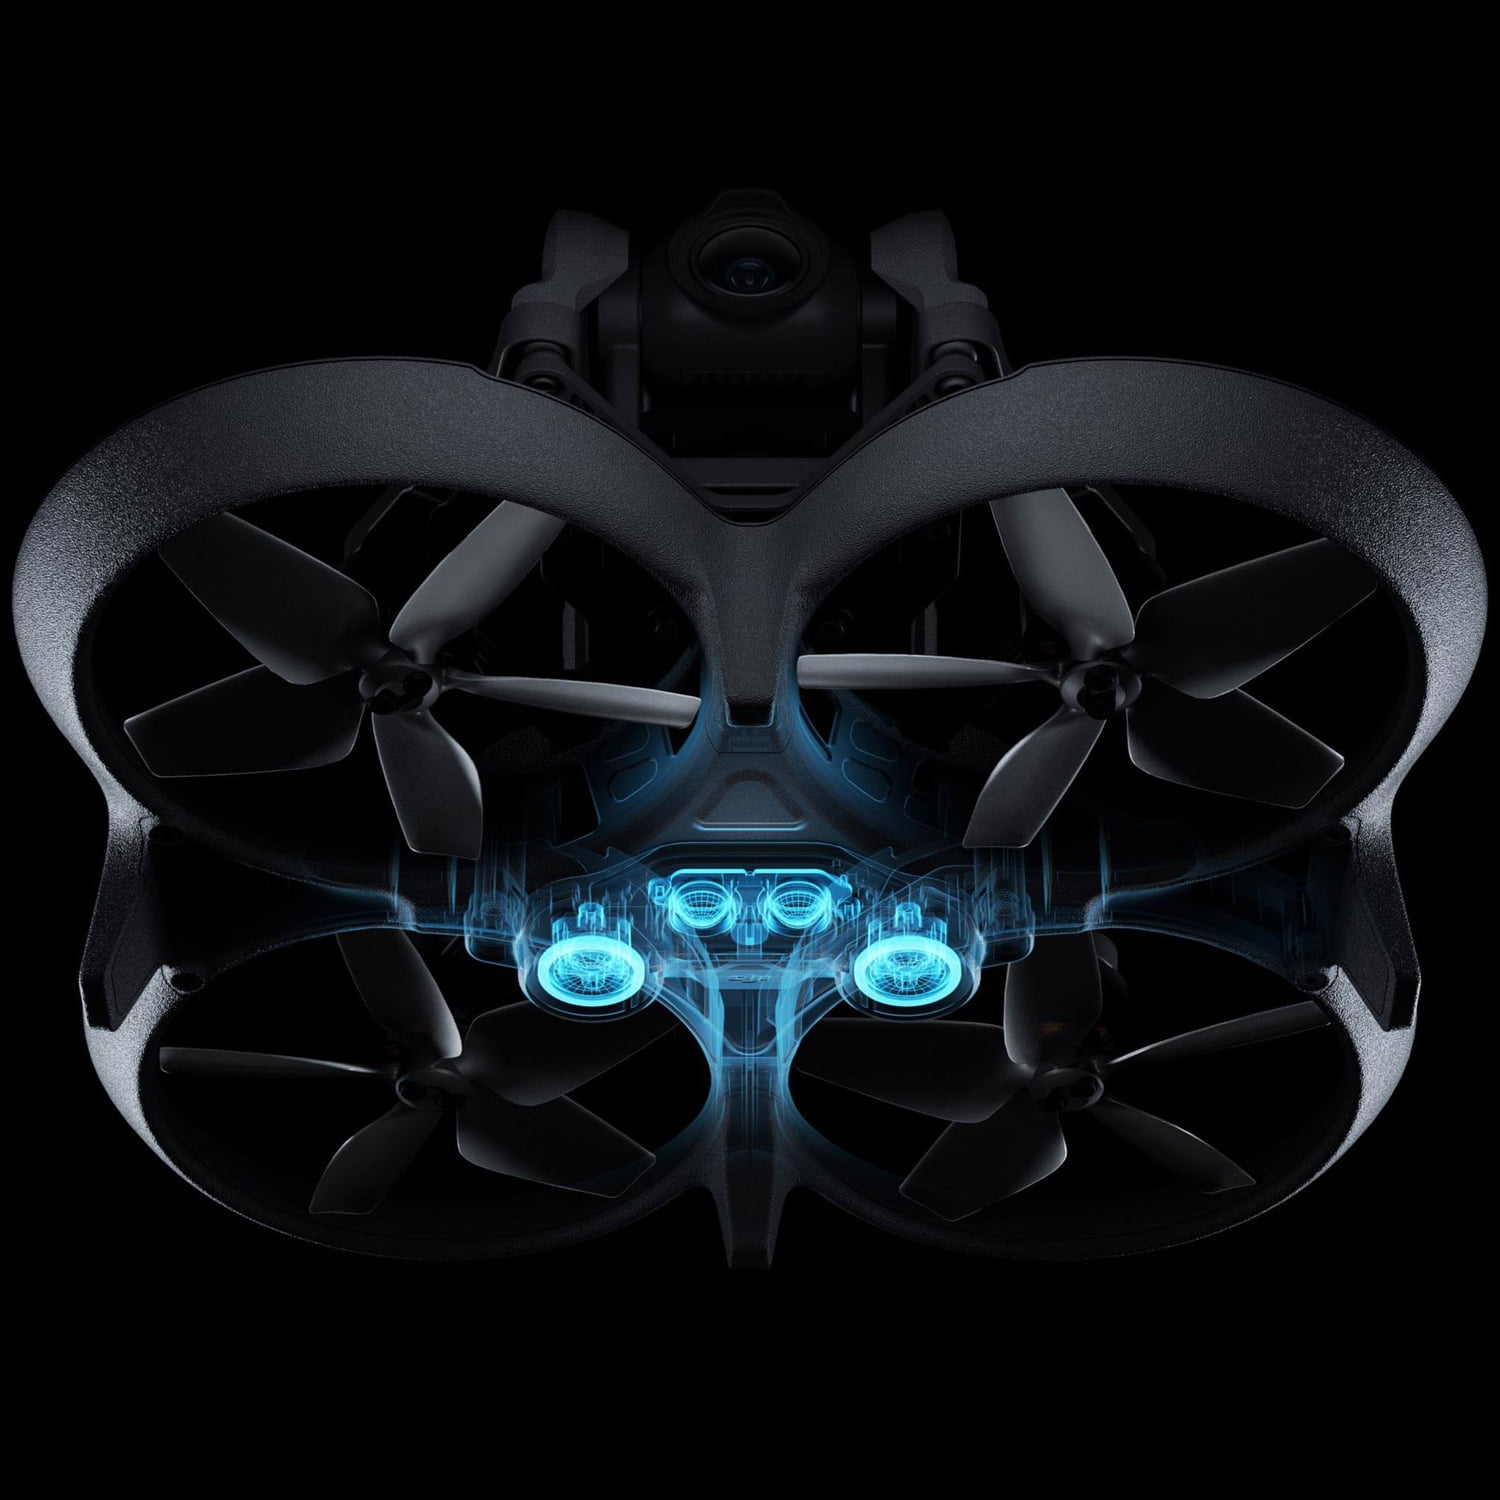  DJI Avata Pro-View Combo (DJI Goggles 2) - With RC Motion 2  Flymore Kit, 3 batteries First-Person View Drone UAV Quadcopter with 4K  Stabilized Video, Built-in Propeller Guard, With 128gb Micro